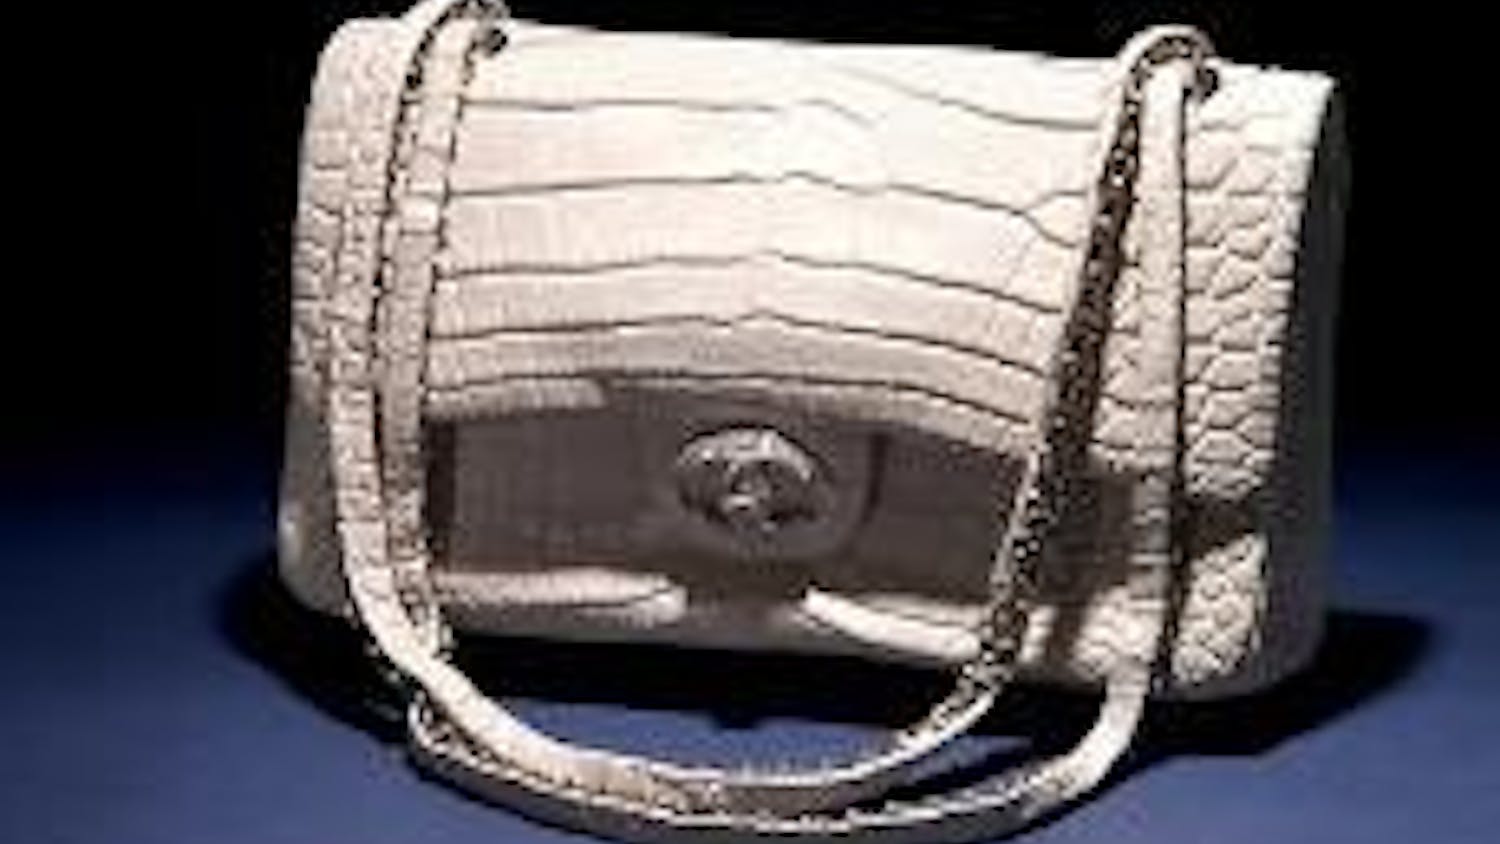 CROCO-DAZZLE - Chanel's Diamond Forever Classic Bag will set you back $261,000 but will launch you into the fashionista stratosphere. The diamond-encrusted handles weigh over three-and-a-half carats. Be one of the lucky 13 to own this jewel! Professionals